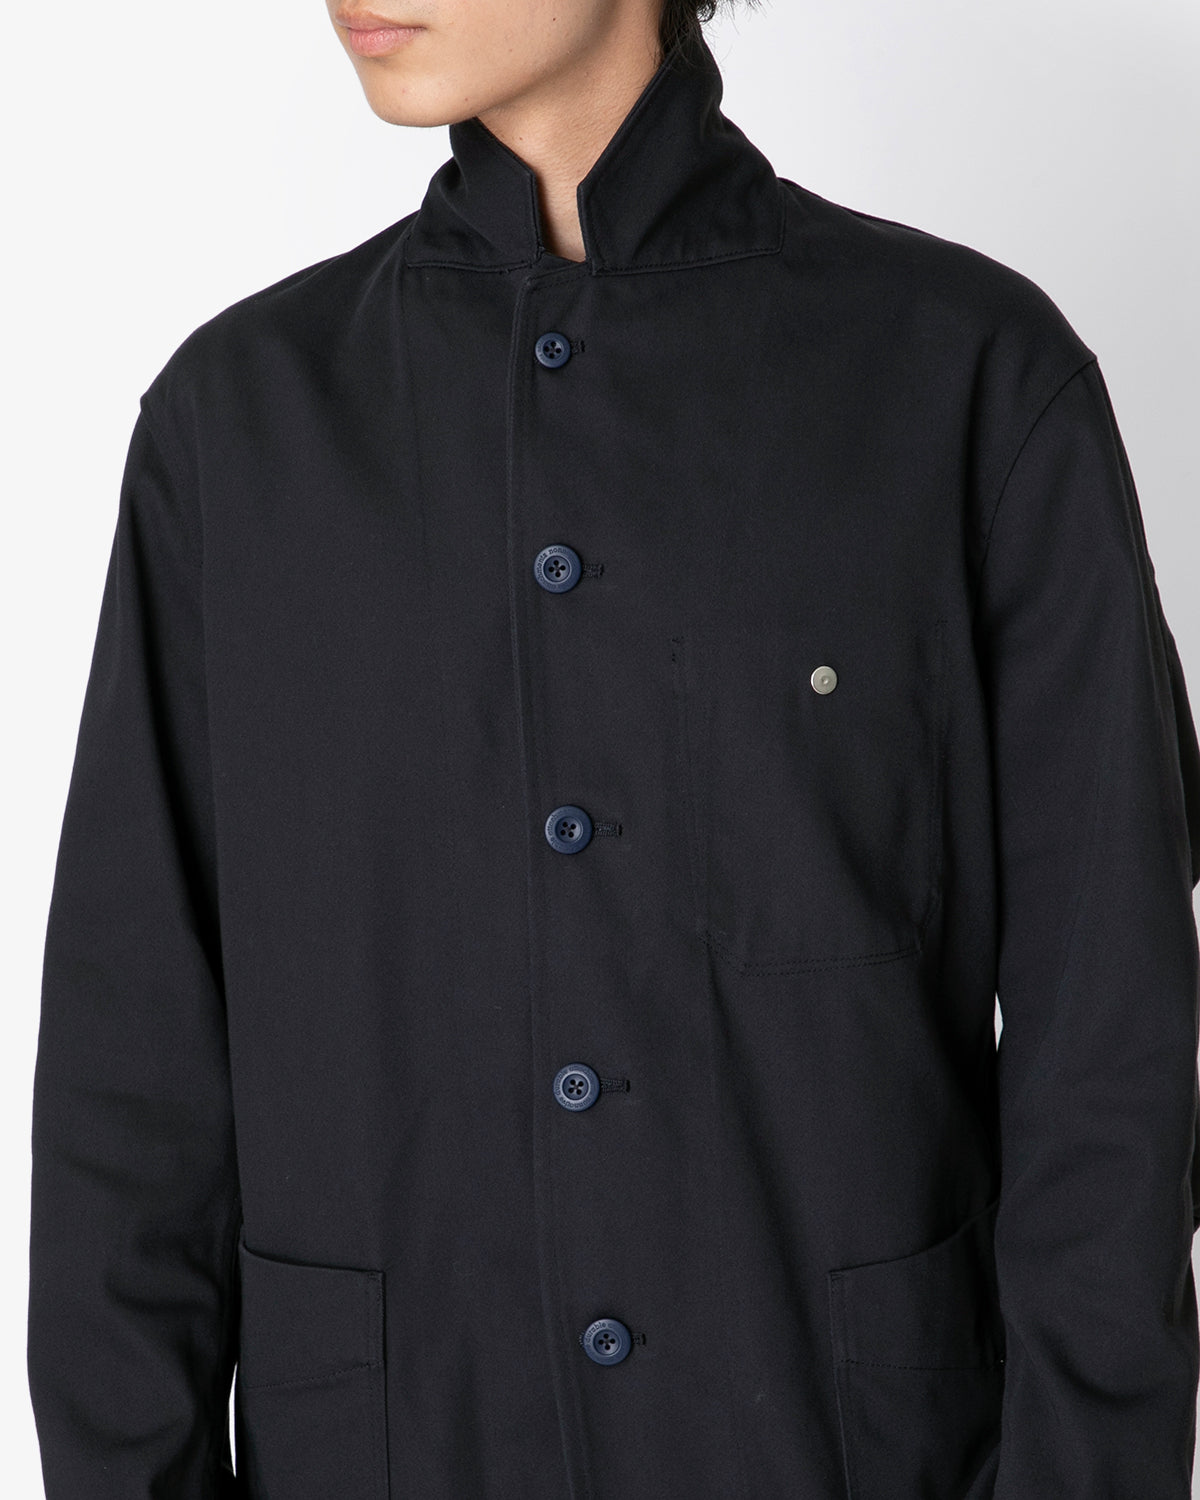 WORKER 5B JACKET COTTON HIGH TWISTED TWILL